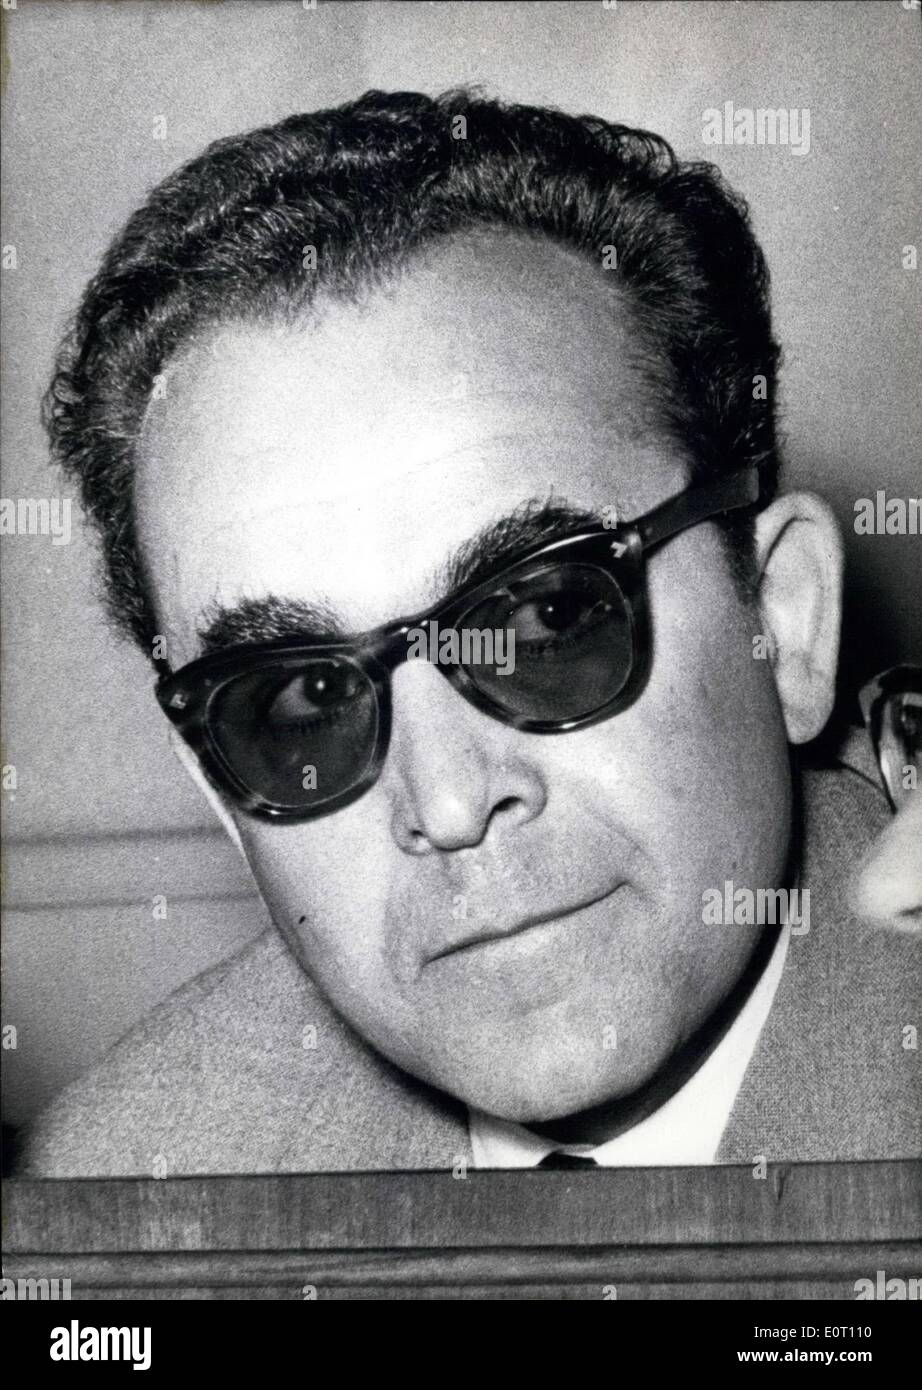 Jun. 06, 1960 - Hush-money for Pohlmann: On the third day of the trial against 38-year-old representative Heinz Pohlmann (Heinz Stock Photo